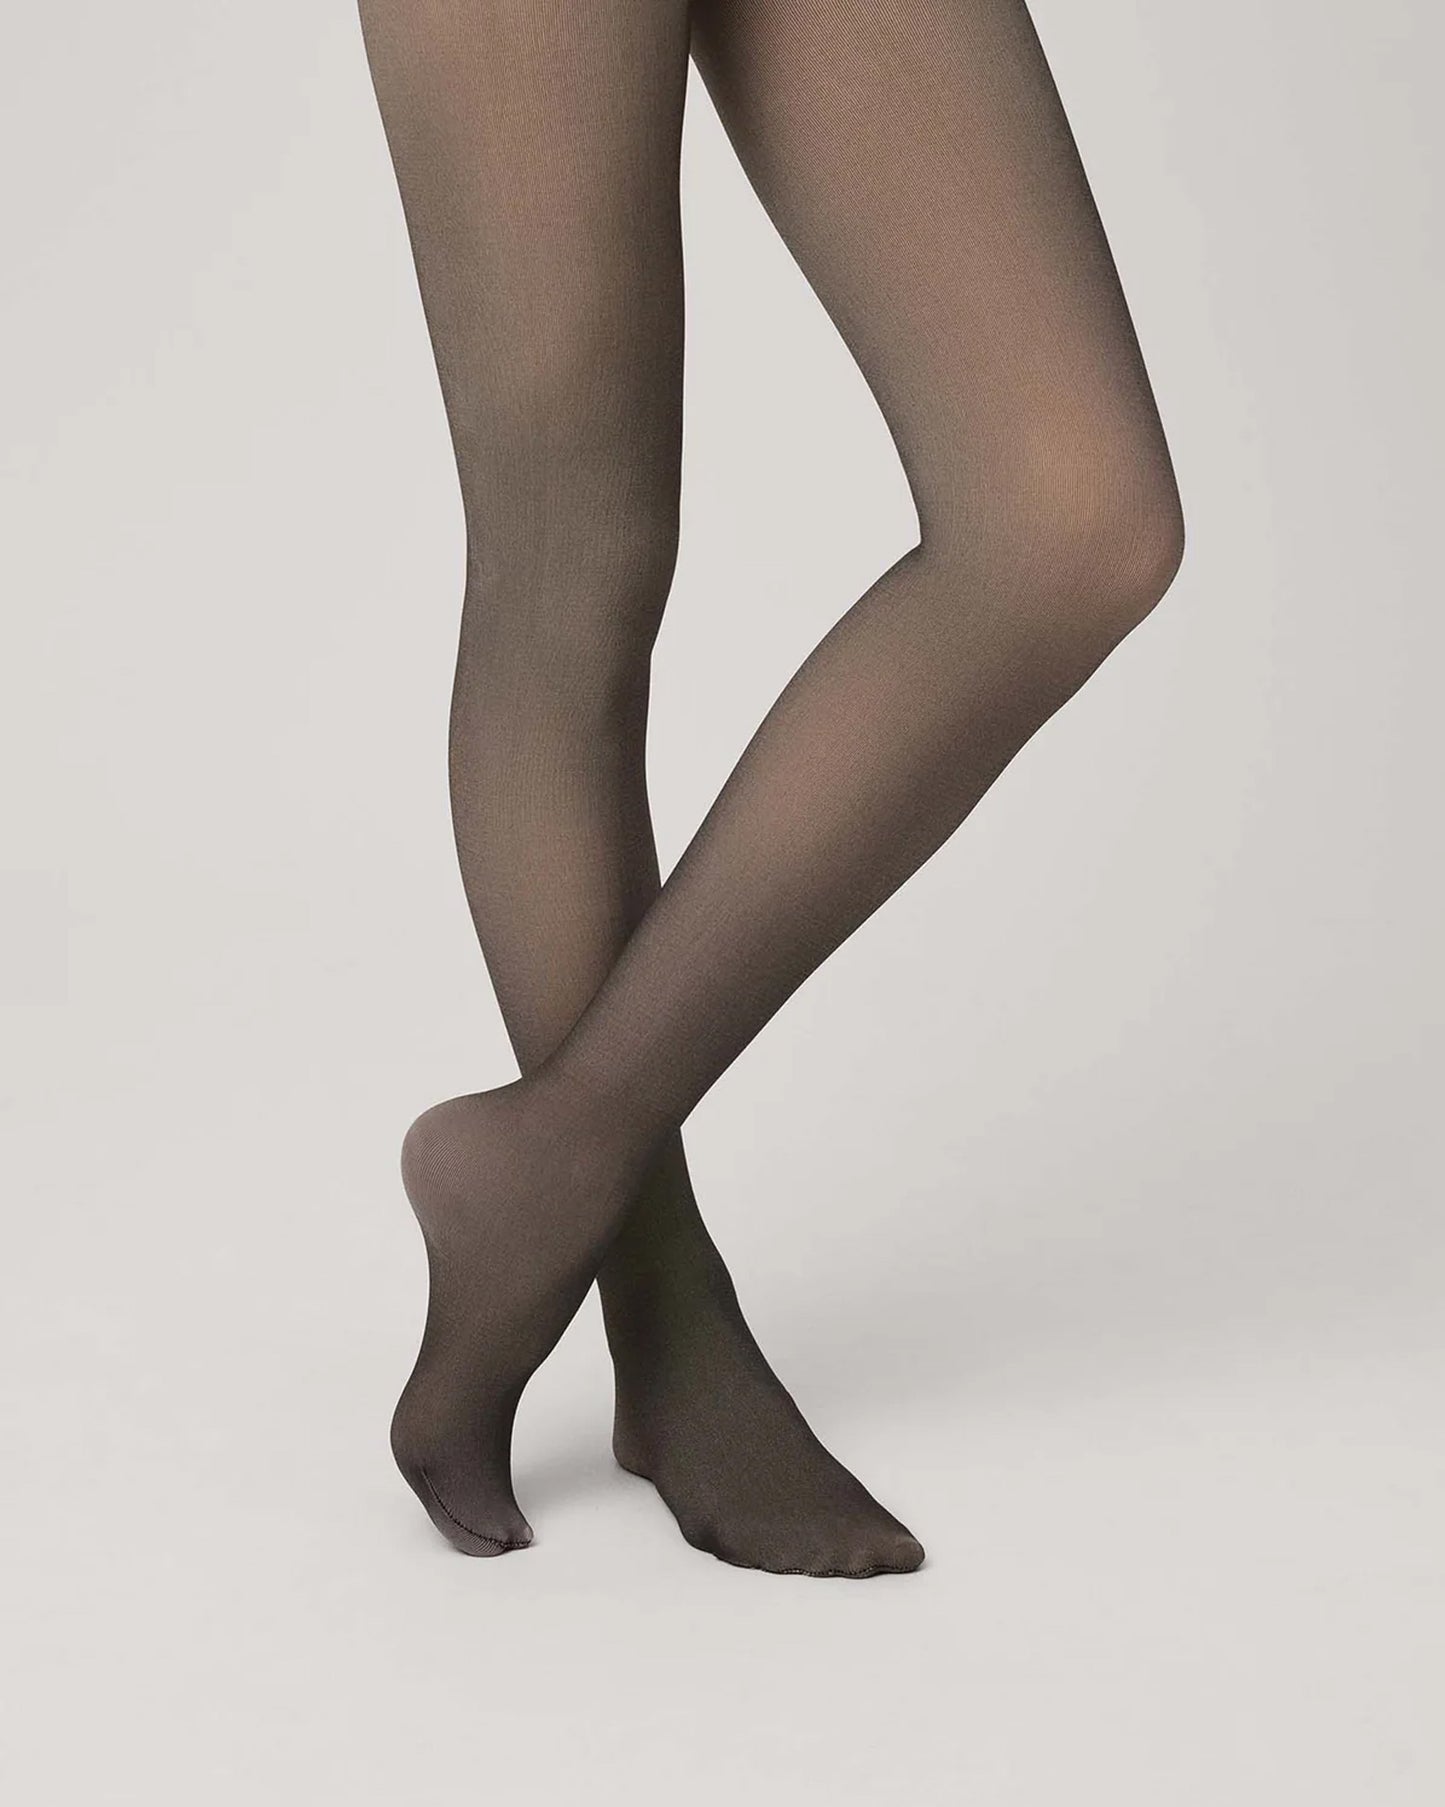 Ysabel Mora 16610 Thermal Tights - Warm thermal tights that have a sheer effect. Inside layer is nude colour with warm plush fleece lining, outer layer is sheer black